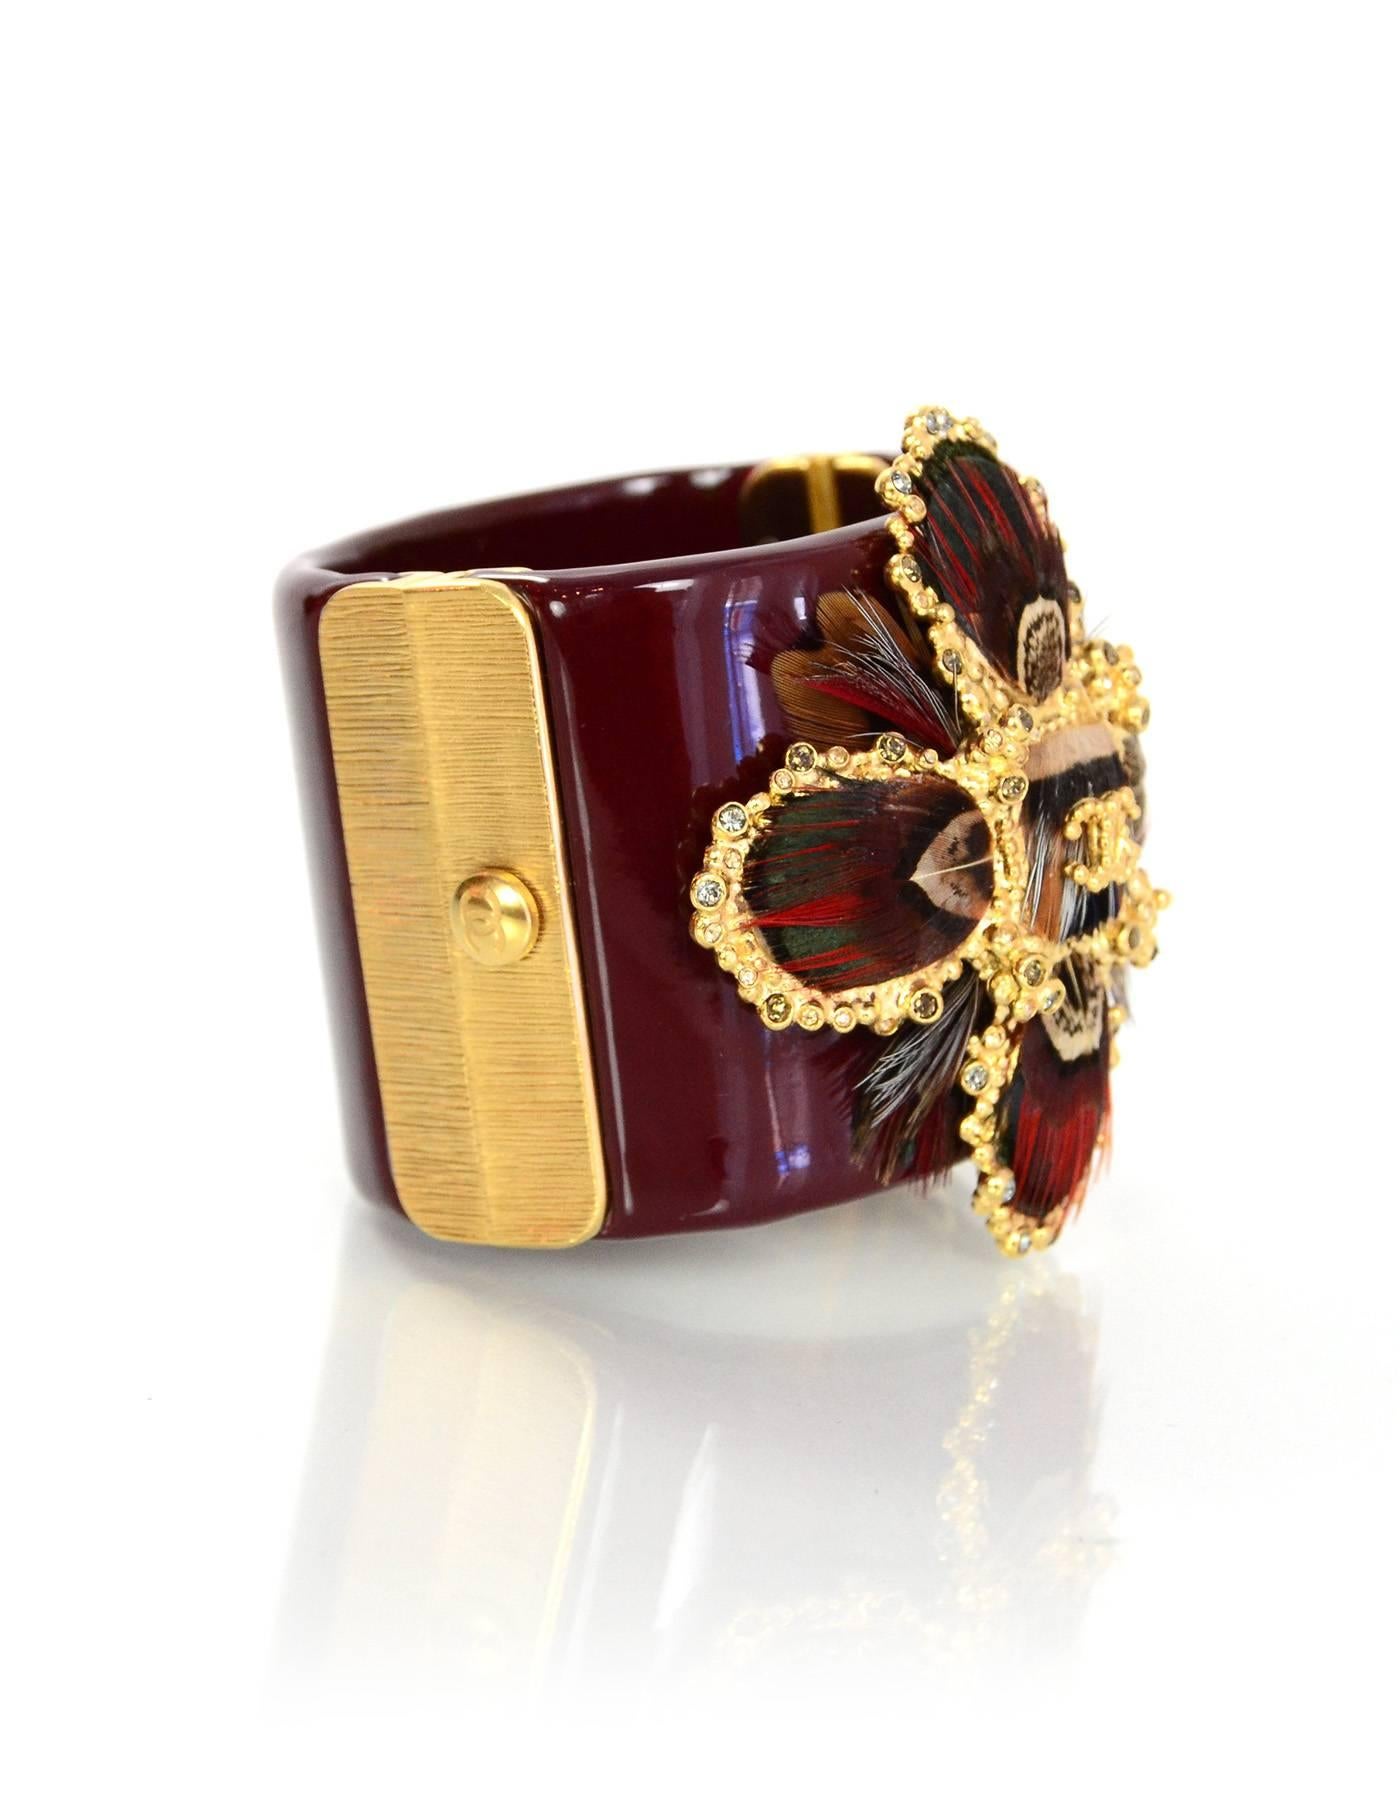 Chanel Burgundy Resin Detailed Cross Cuff 
Features goldtone metal, feather and crystal cross detail

Made In: Italy
Year of Production: 2013
Color: Burgundy and goldtone
Materials: Resin, metal, crystal, and feather
Closure: Push clasp